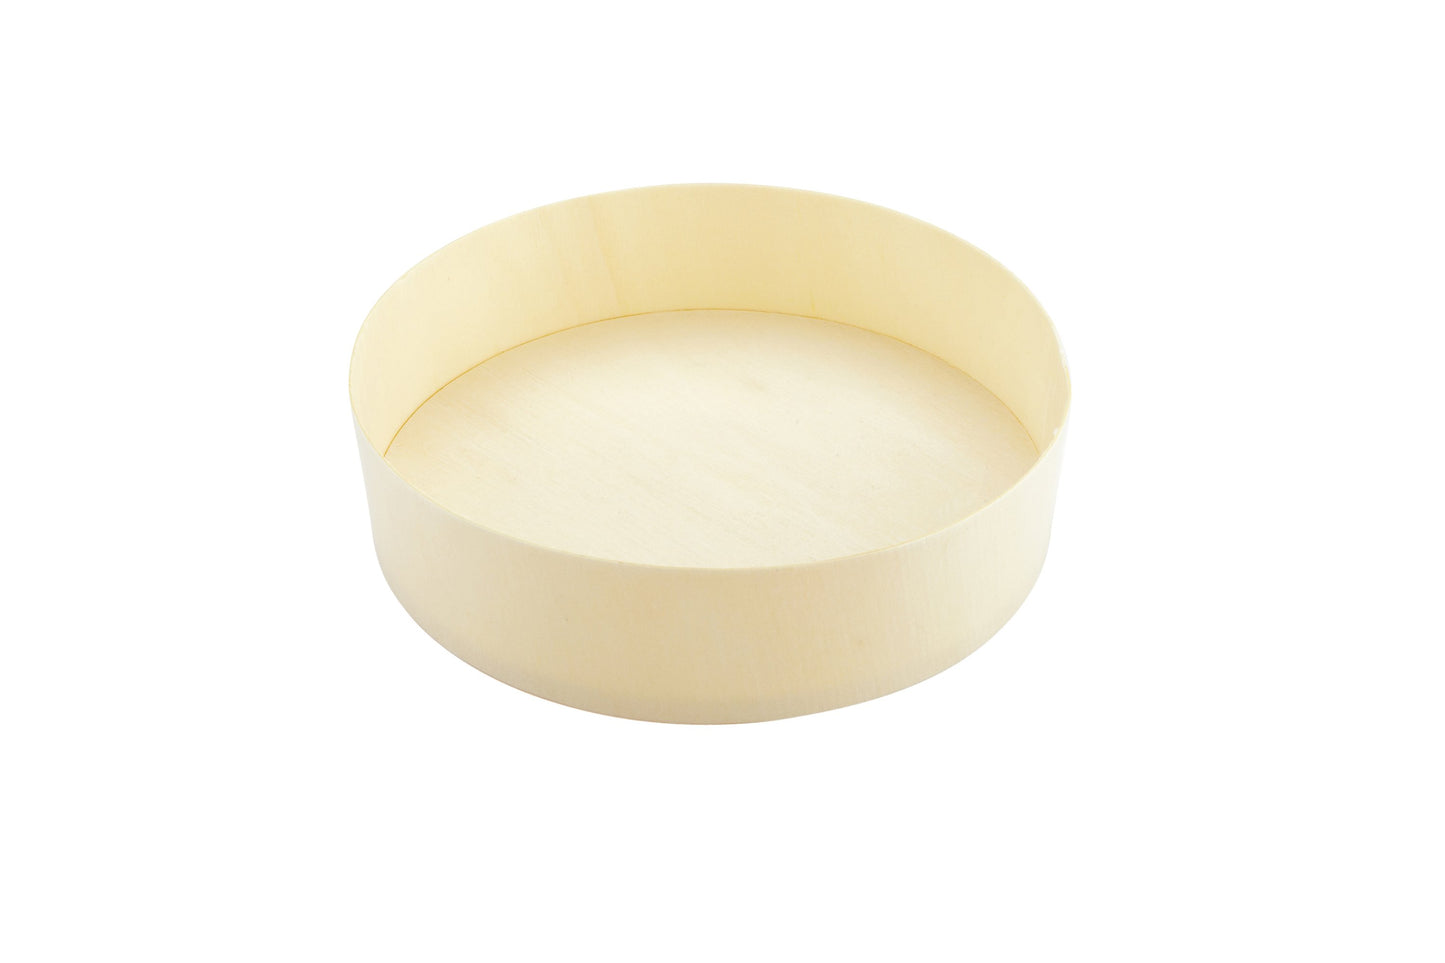 Taipei Collection Large Round Poplar Container 6.75 inches 100 count box